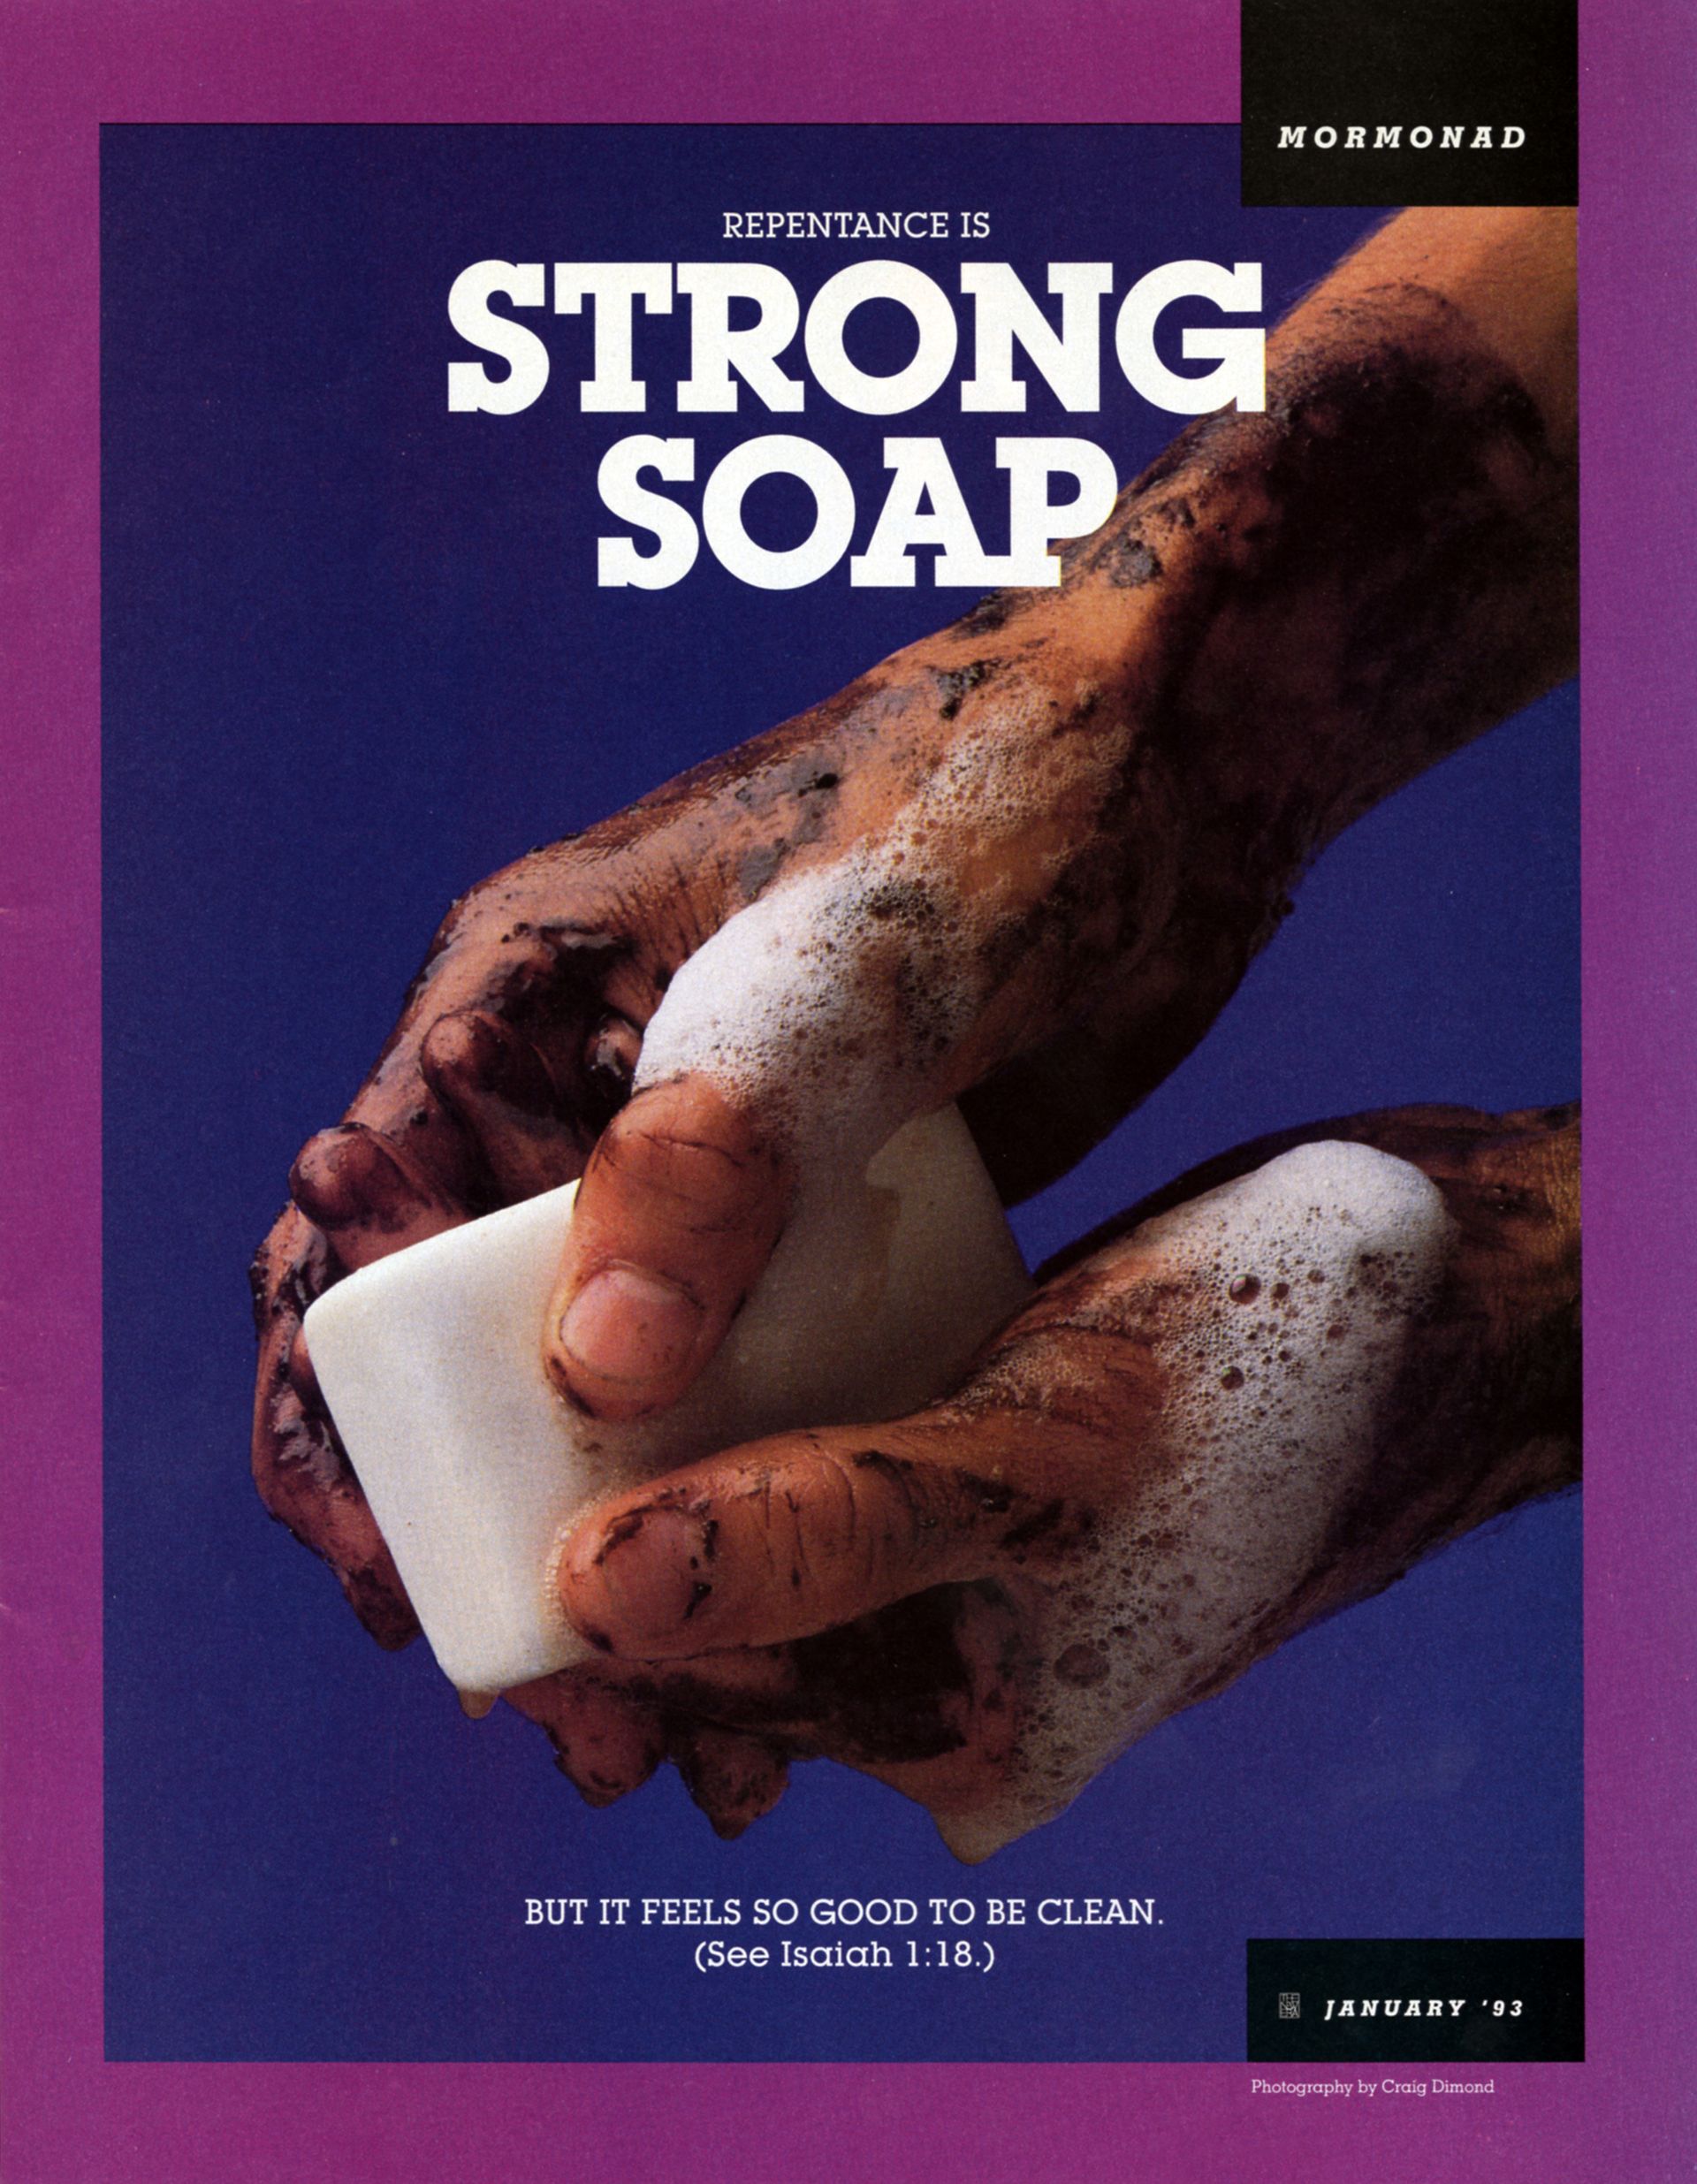 Repentance Is Strong Soap. But it feels so good to be clean. (See Isaiah 1:18.) Jan. 1993 © undefined ipCode 1.